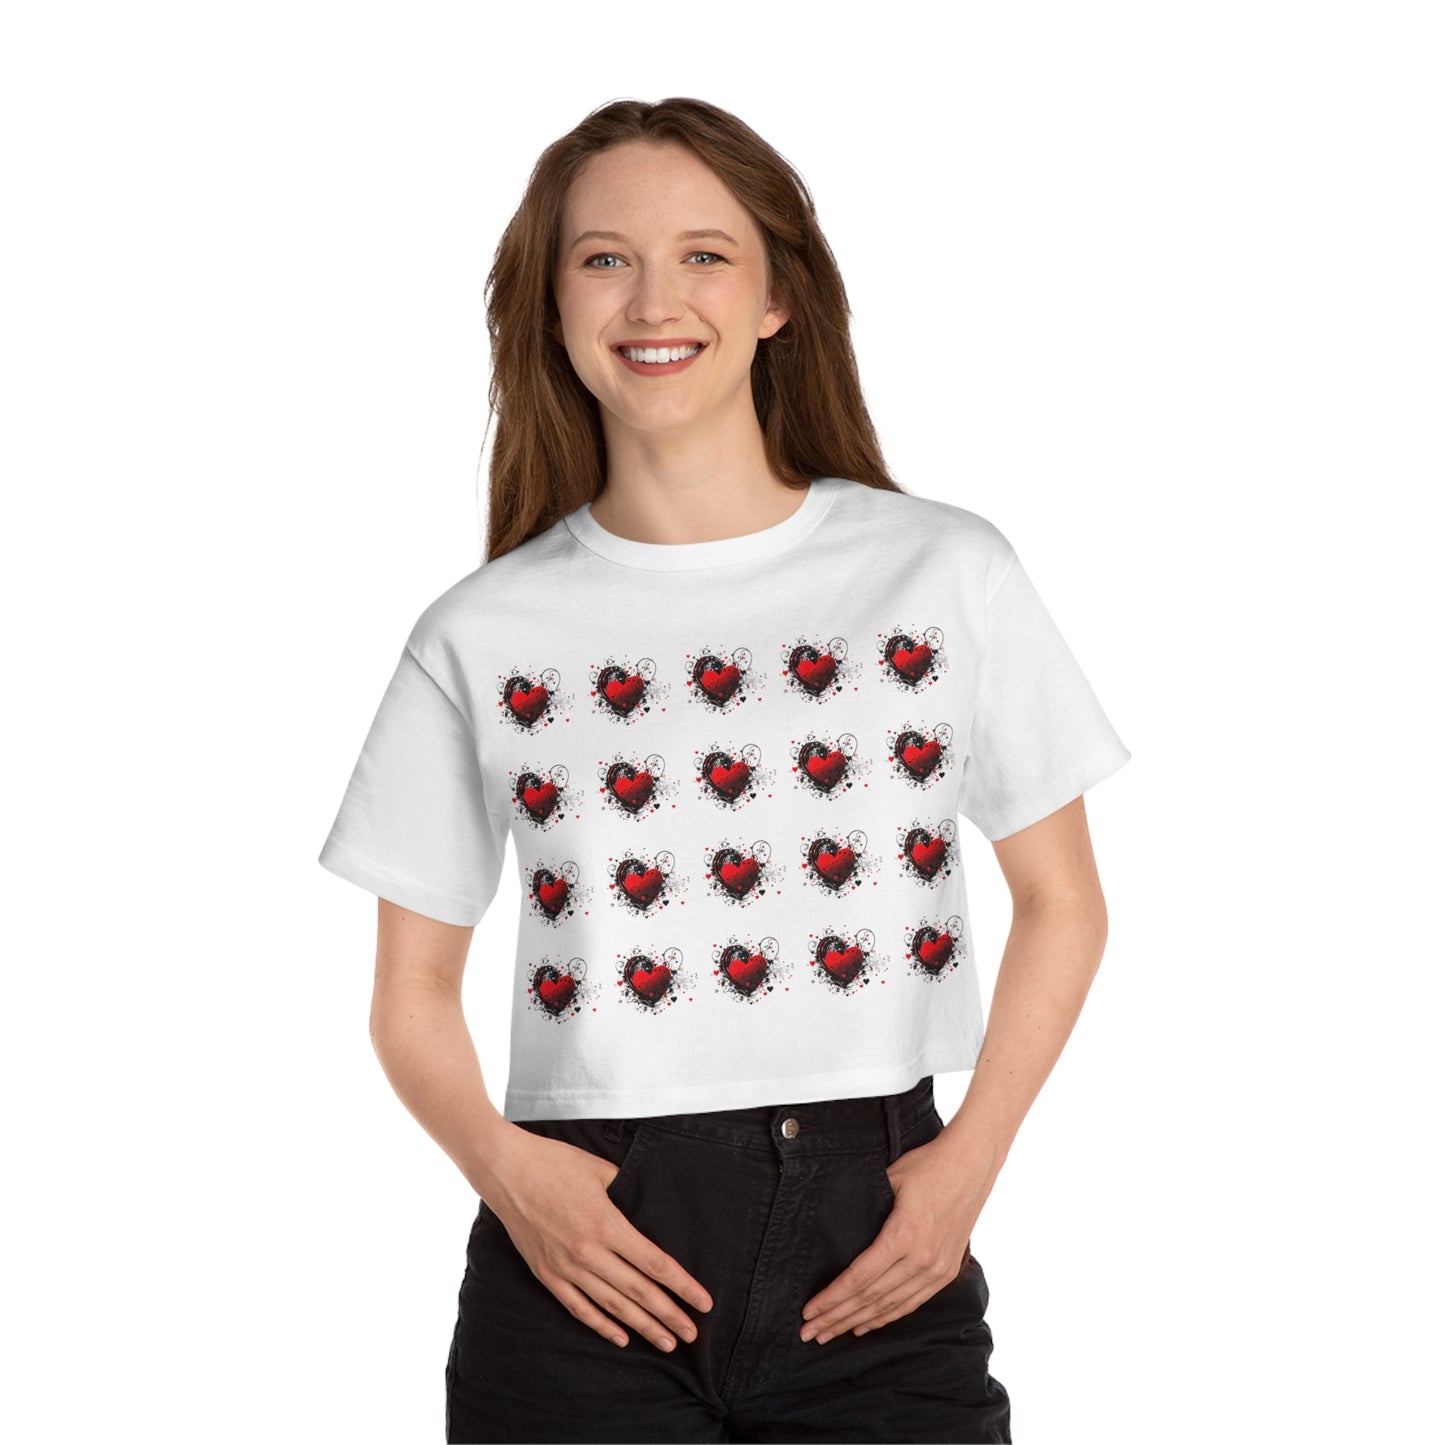 Valentine's and musical combination Champion Women's Heritage Cropped T-Shirt for valentine's day.